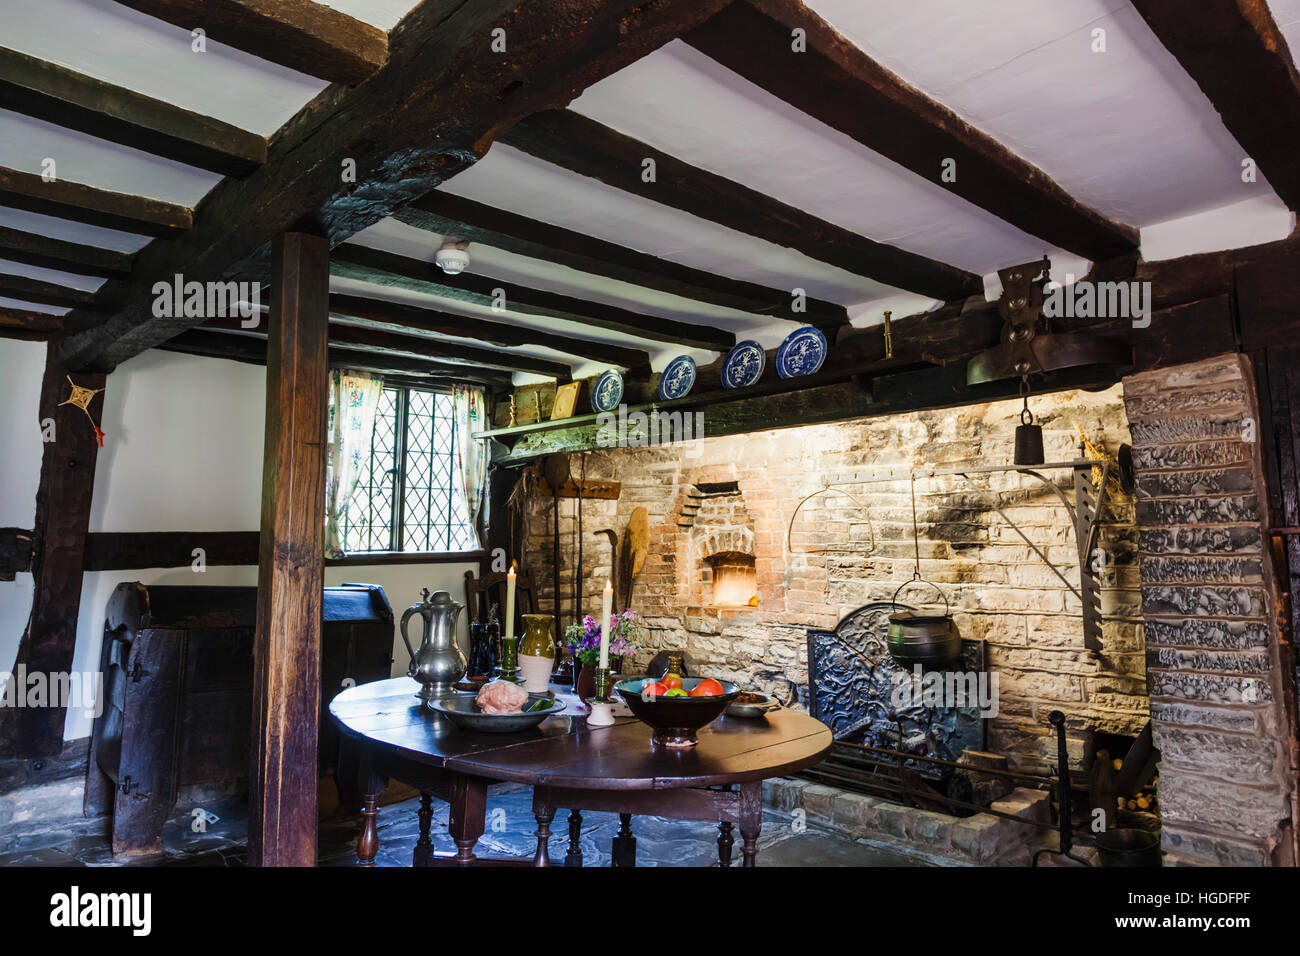 England, Warwickshire, Cotswolds, Stratford-Upon-Avon, Anne Hathaway's Cottage, Dining Room Stock Photo